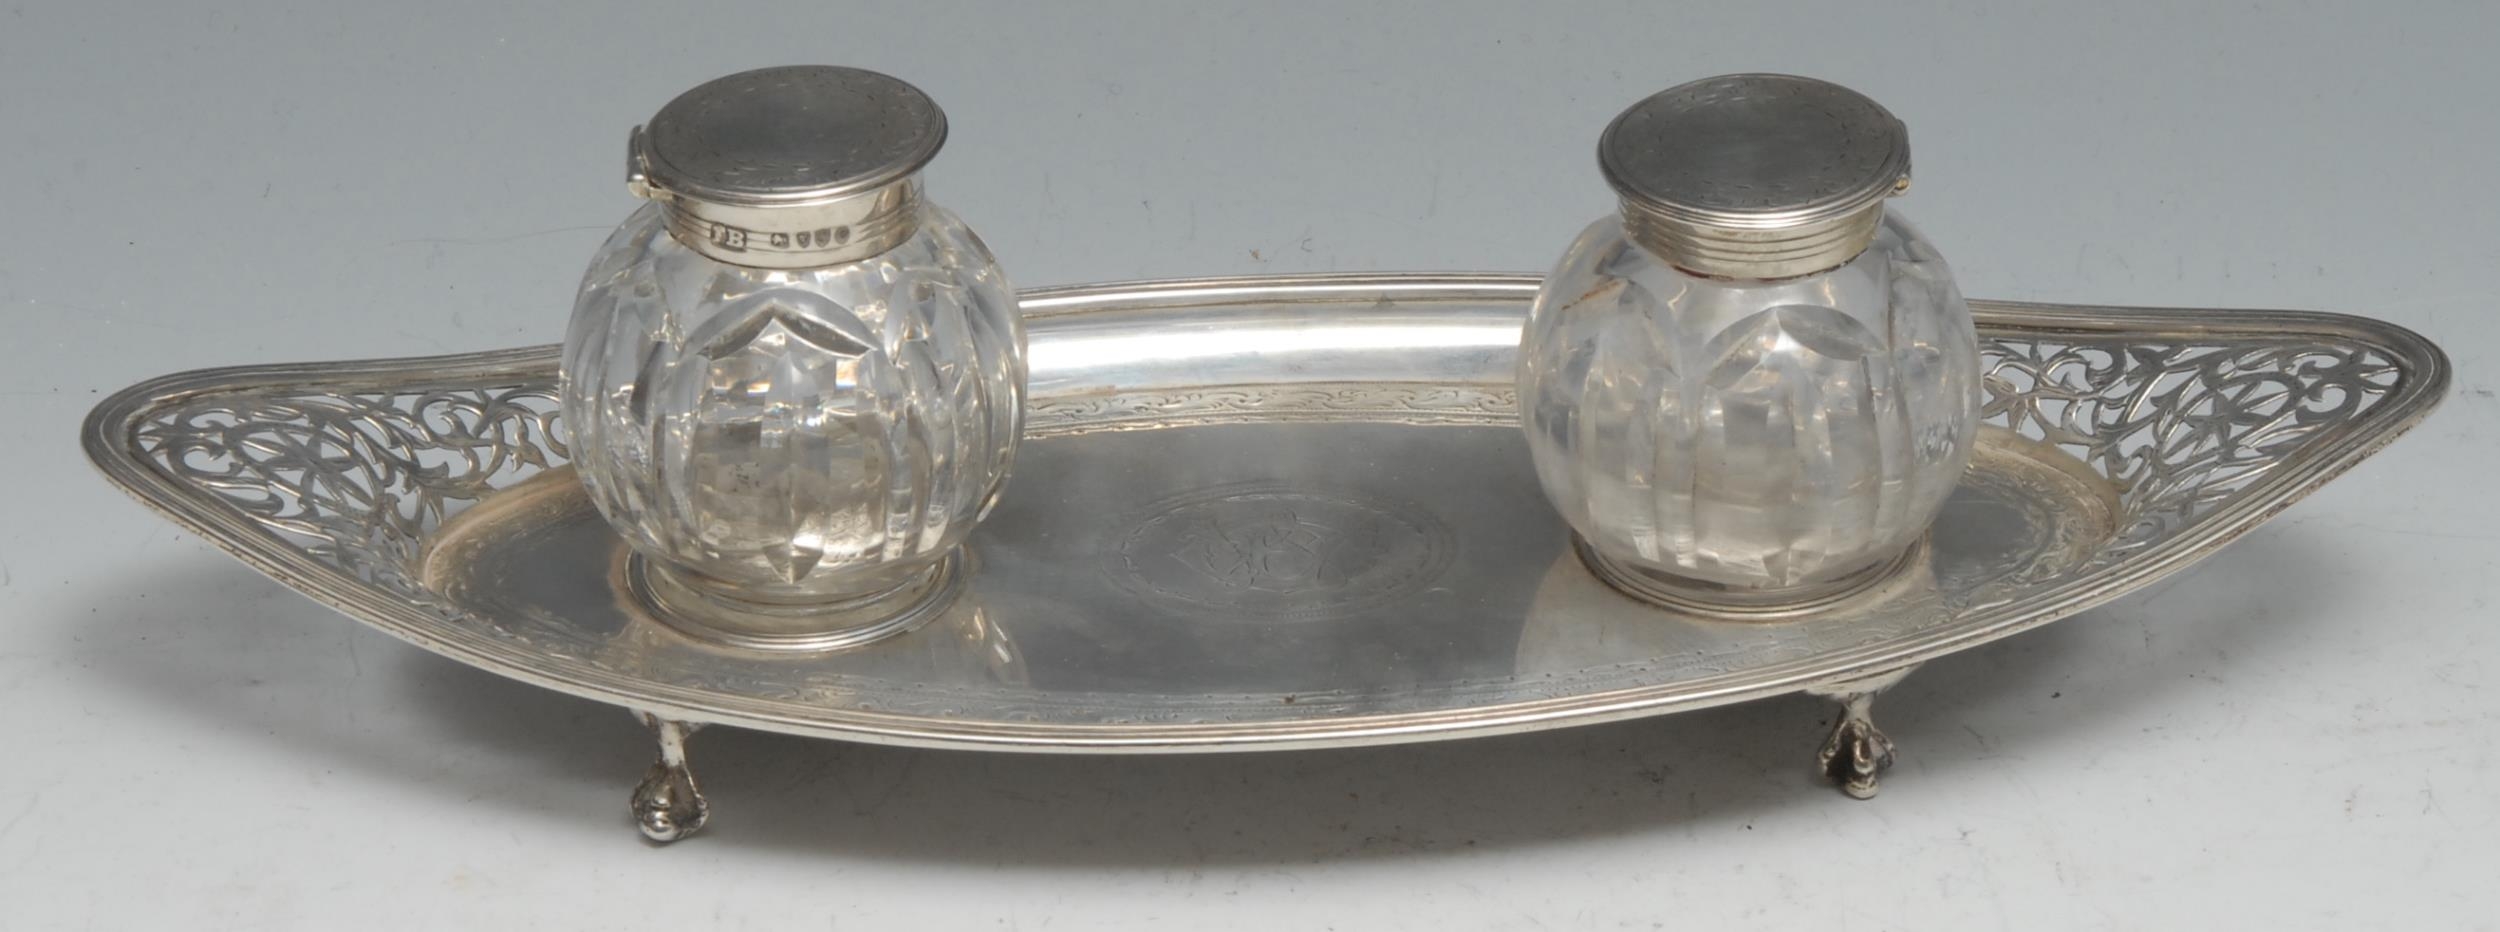 A George III silver navette shaped inkstand, pierced and bright-cut engraved in the Neo-Classical